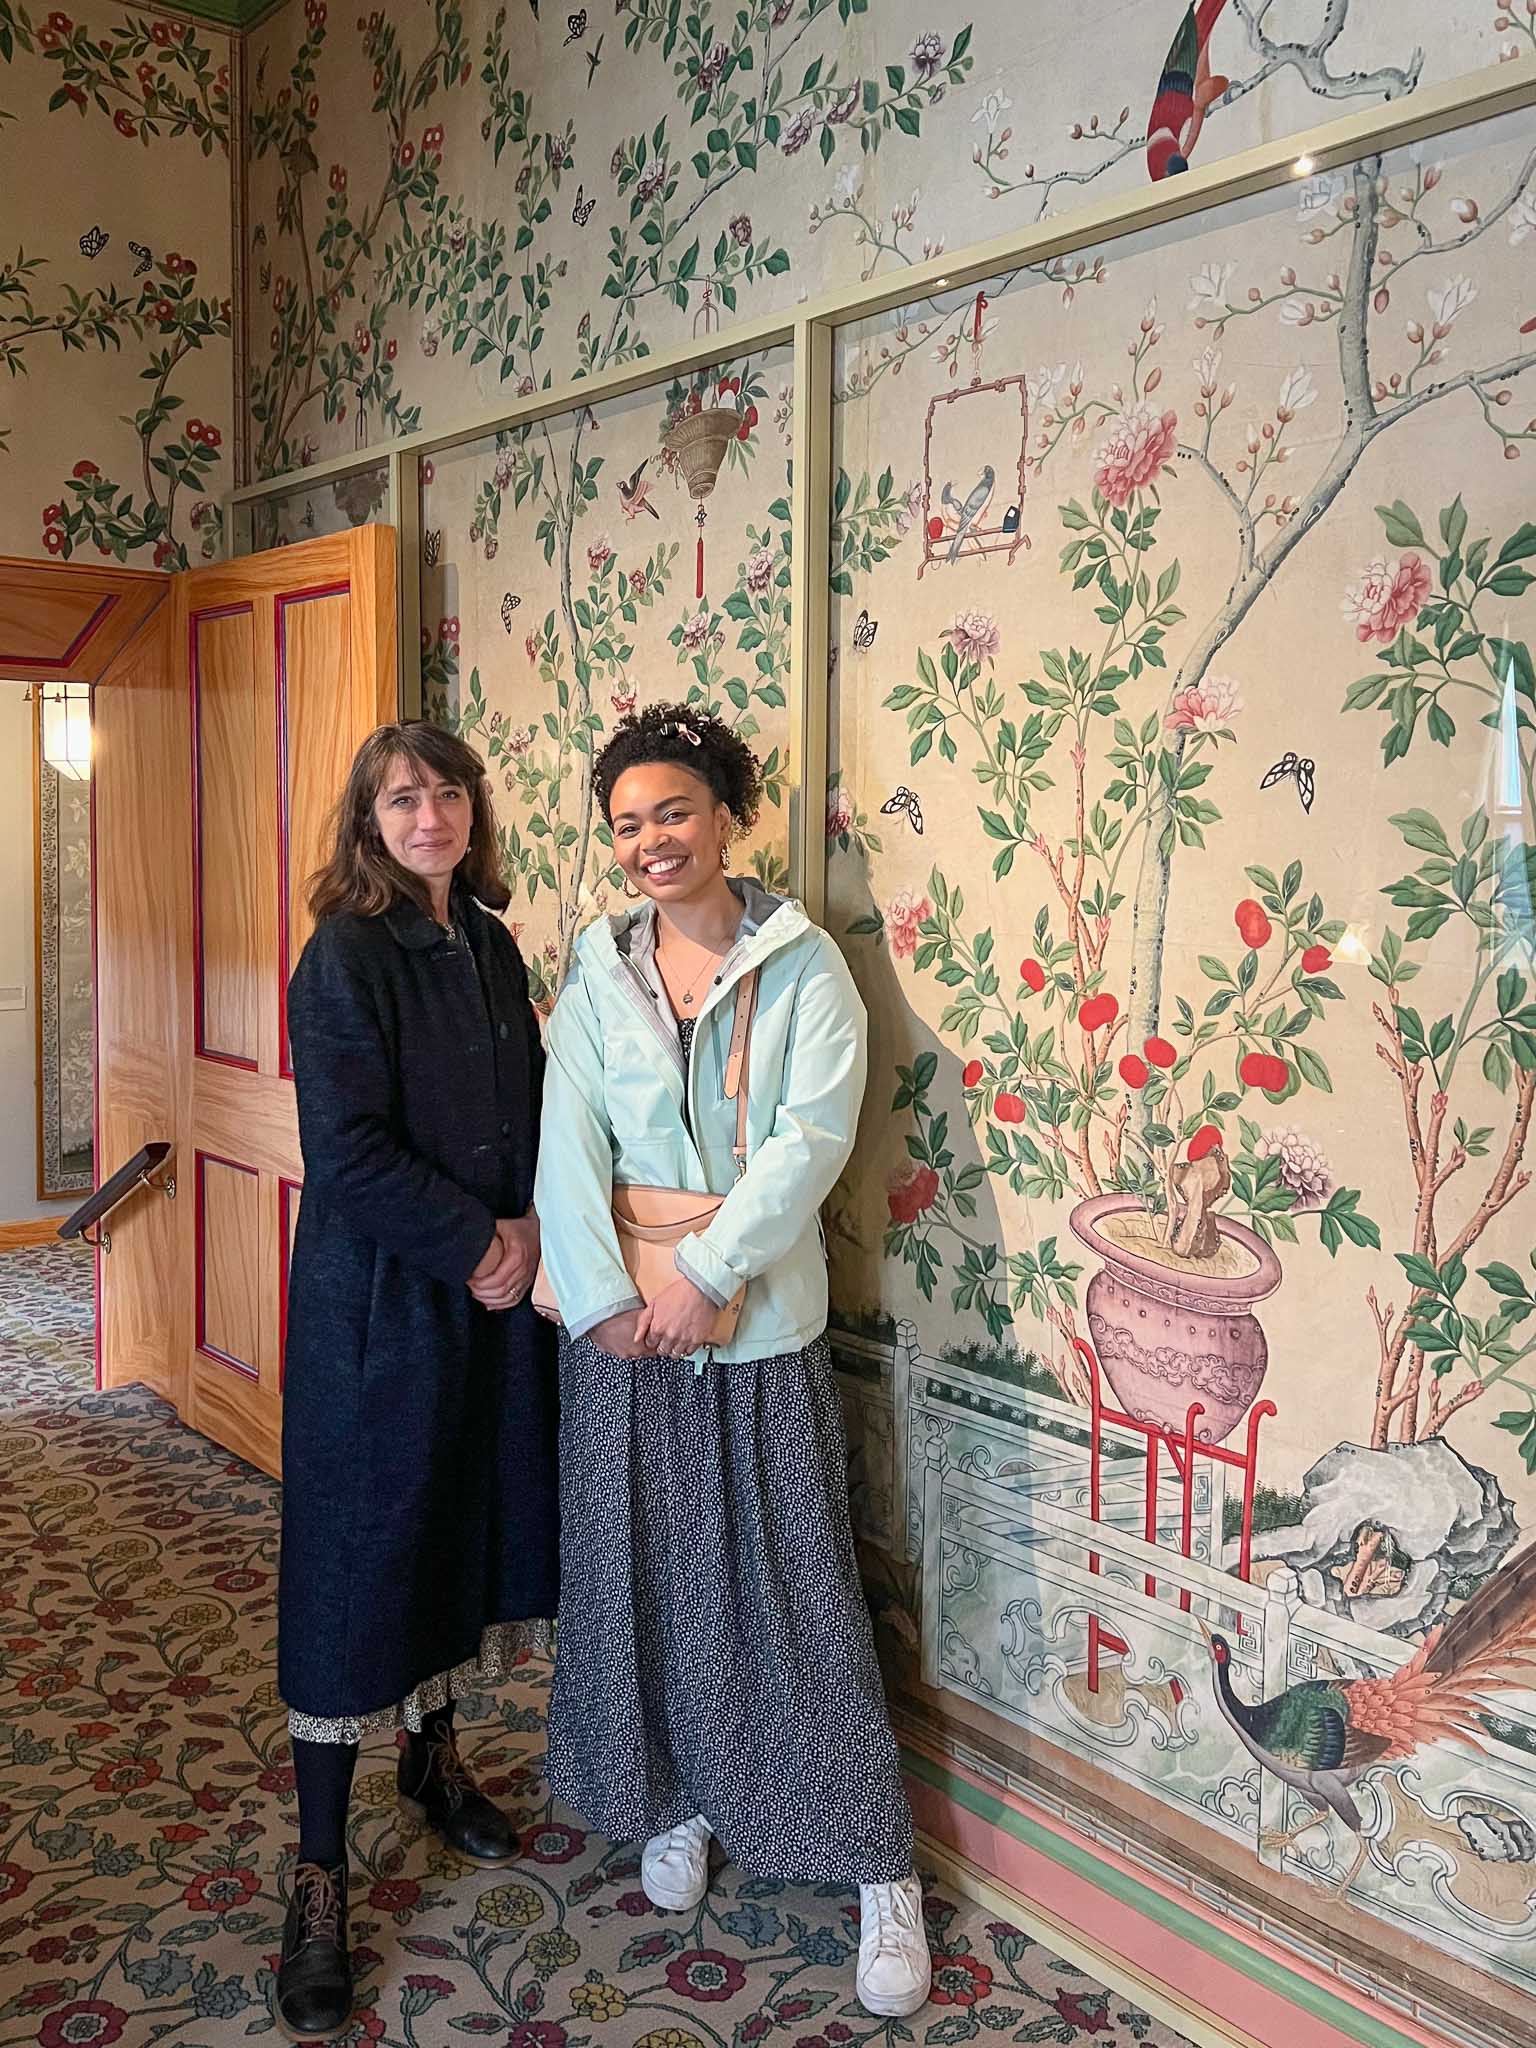 Artist Diane Hill and art historian Dr. Alexandra Loske in front of colourful chinoiserie wallpaper inside Brighton Pavilion